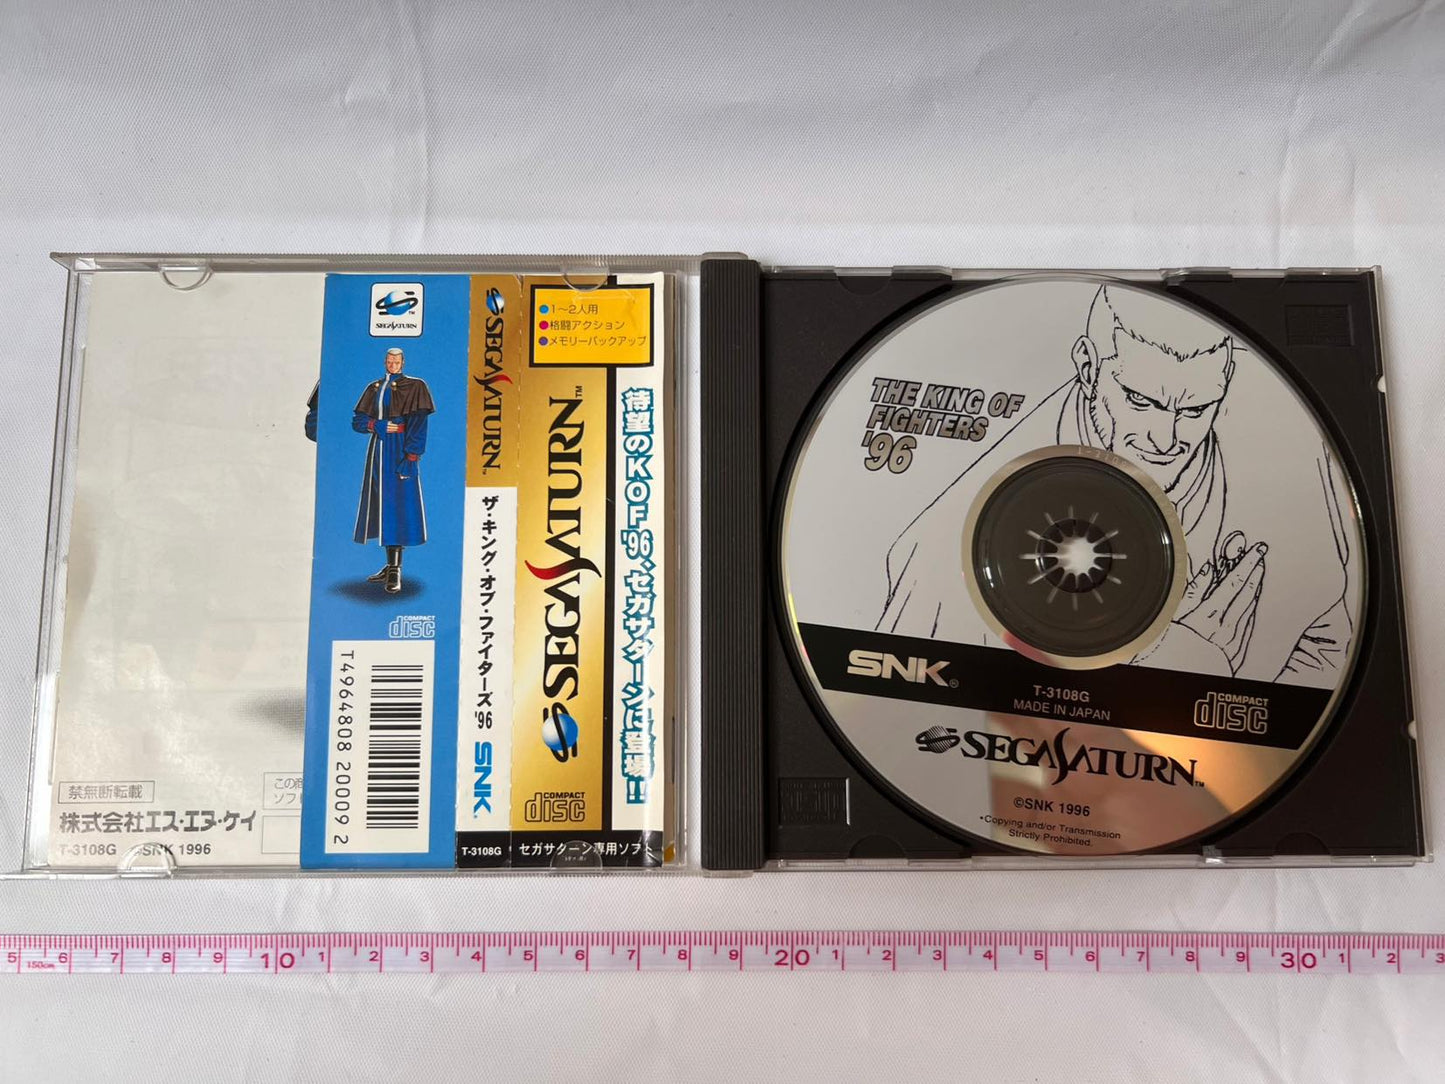 Whole sale The King Of Fighters 95, 96, 97 SEGA Saturn Games set-f1006-